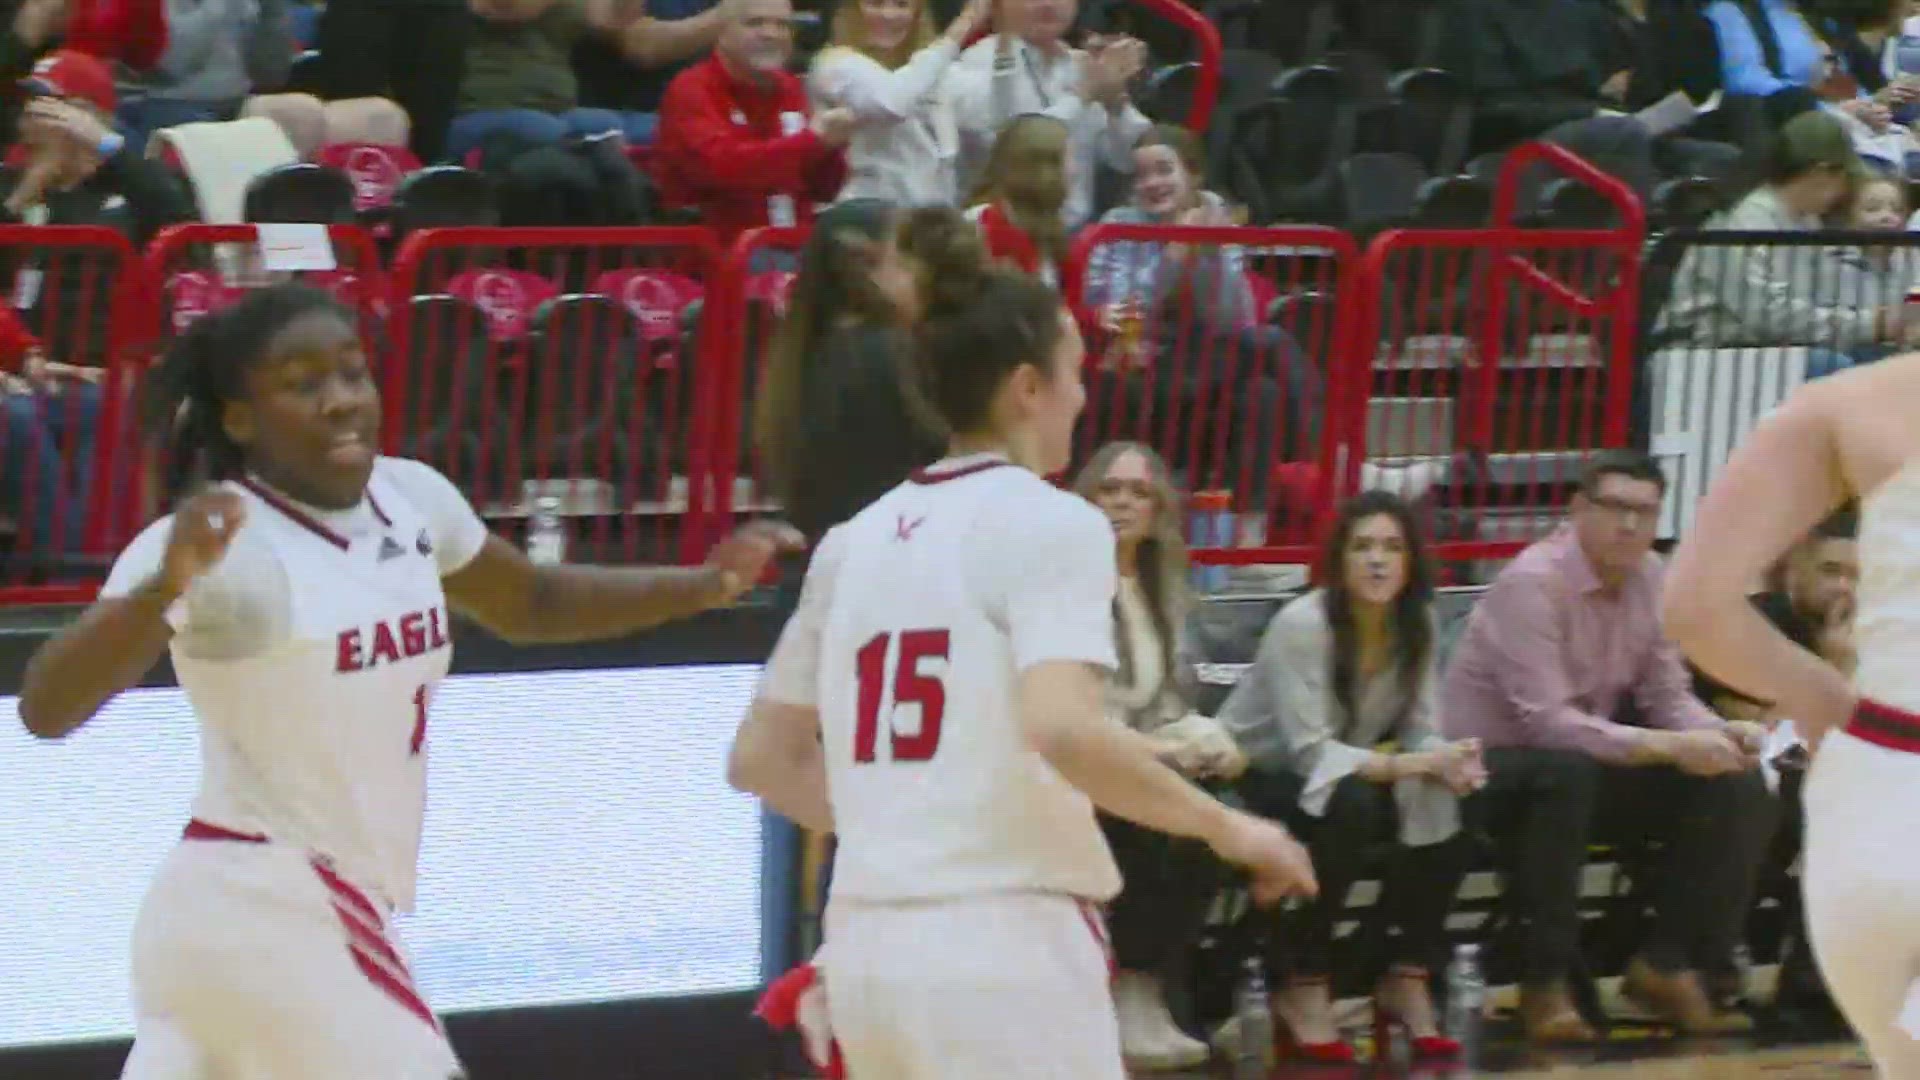 Eastern Washington topped Northern Arizona 67-42 to take first place in the Big Sky Conference.